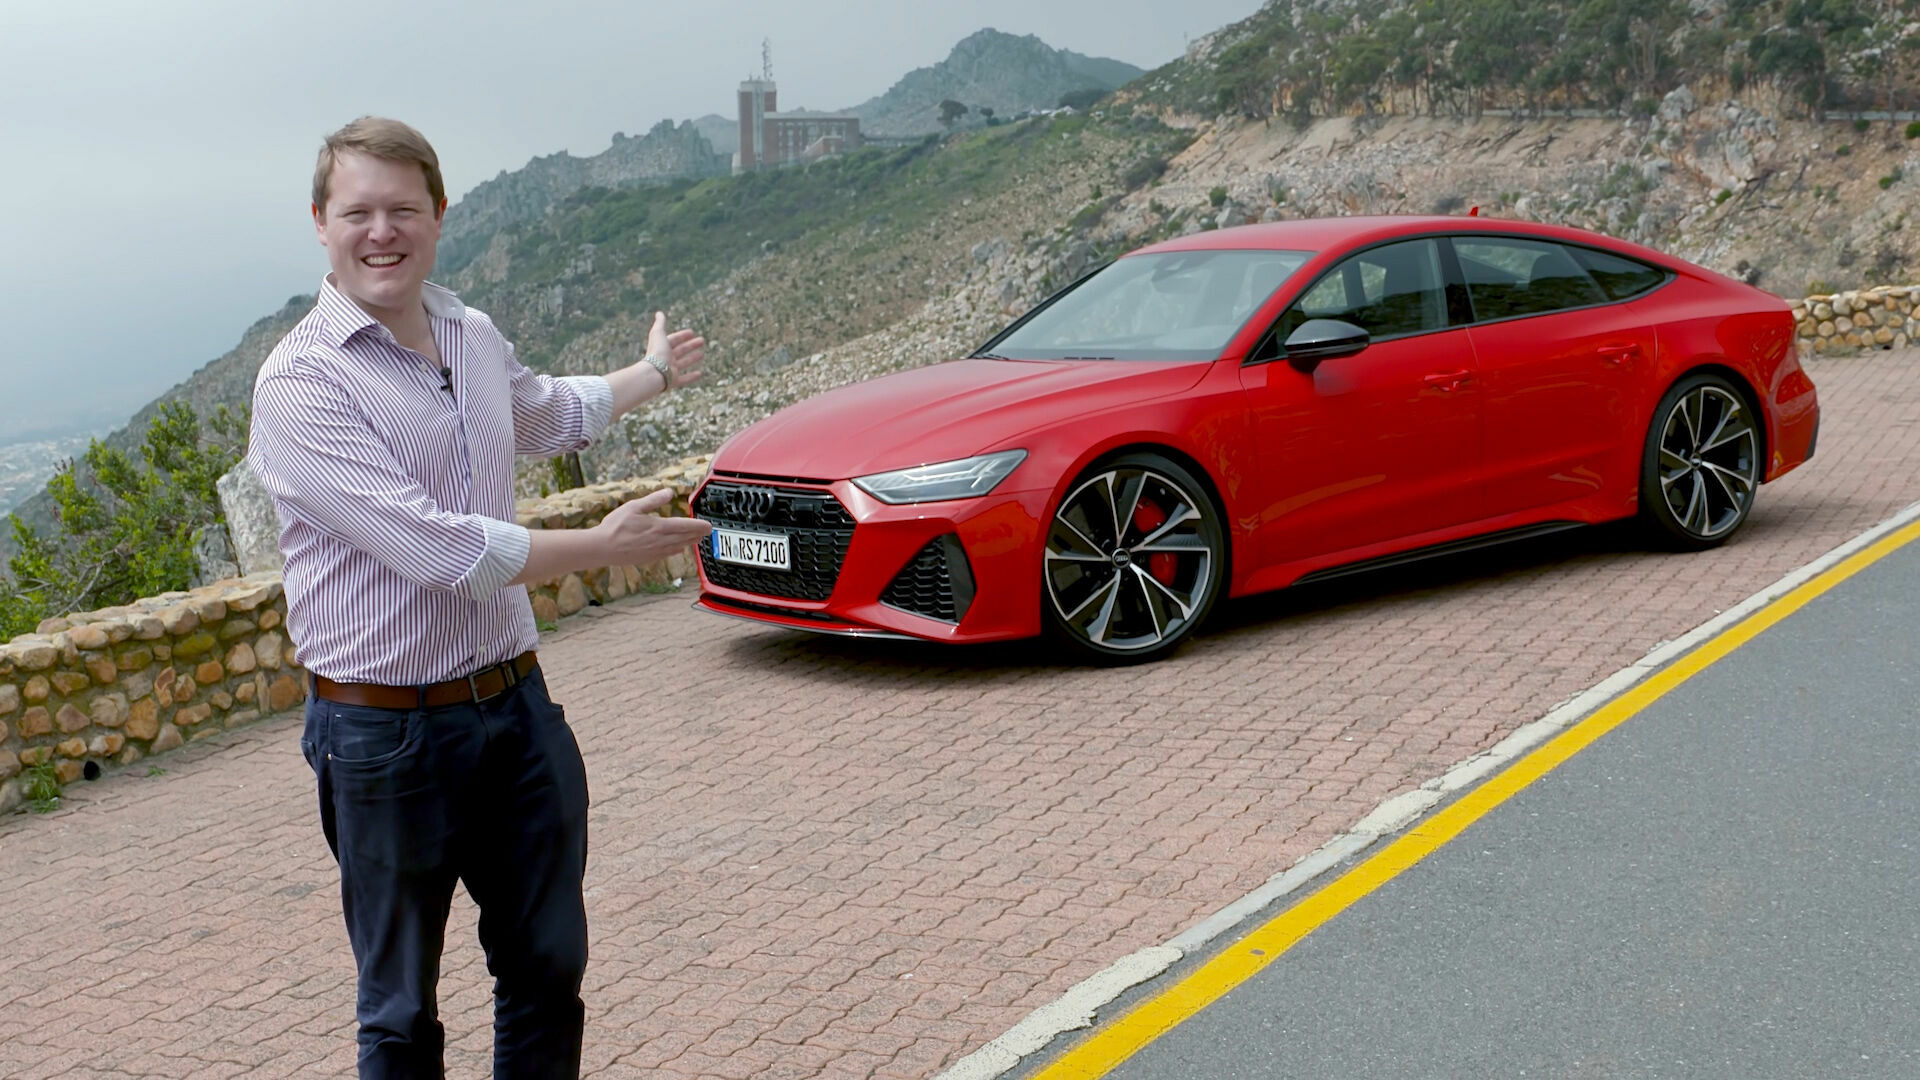 Shmee reviews the new Audi RS 7 Sportback